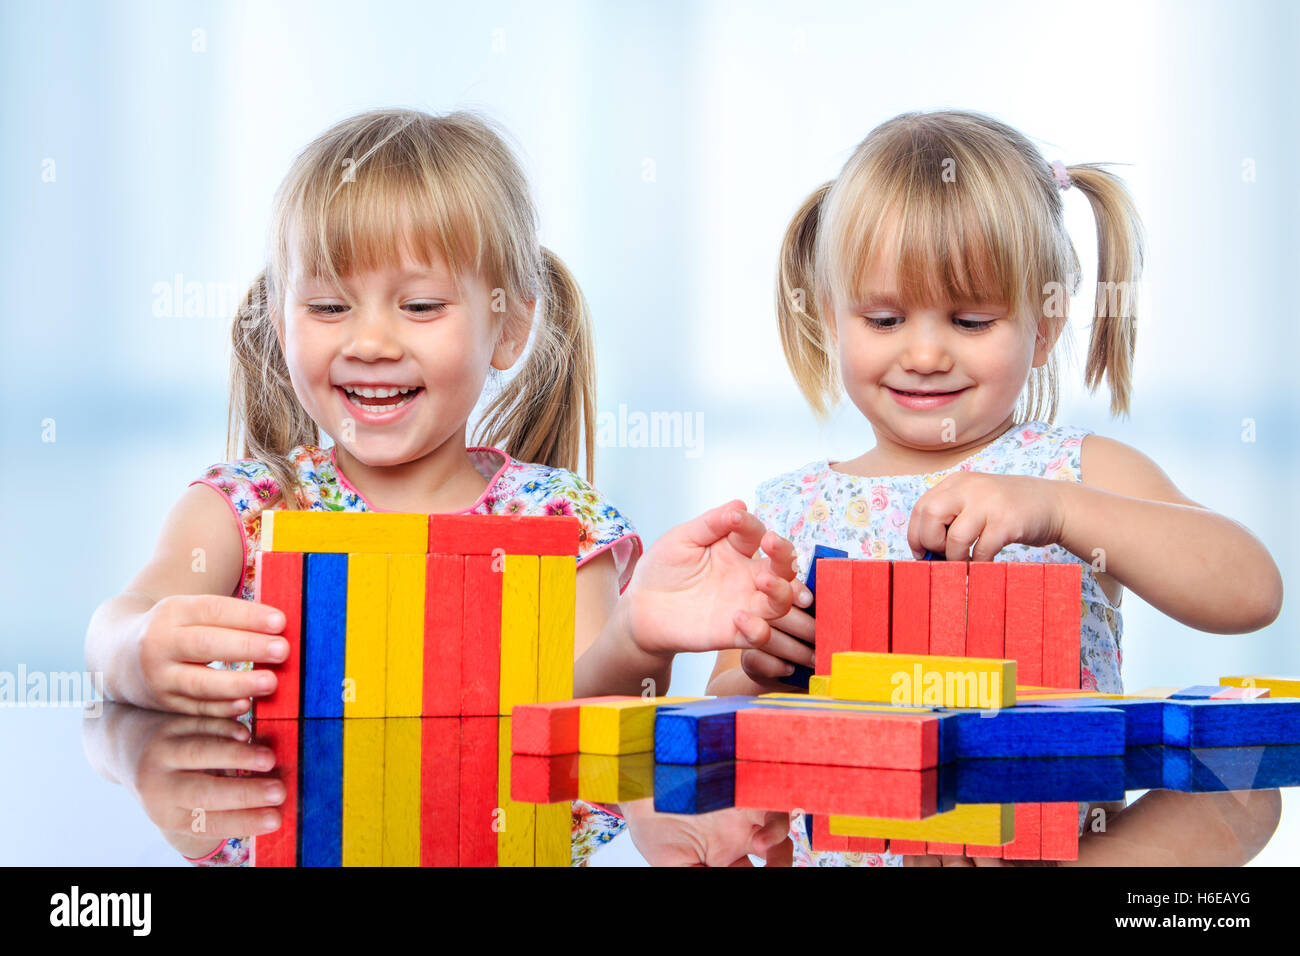 Close up portrait of two little girls playing with colorful wooden pieces at table. Stock Photo